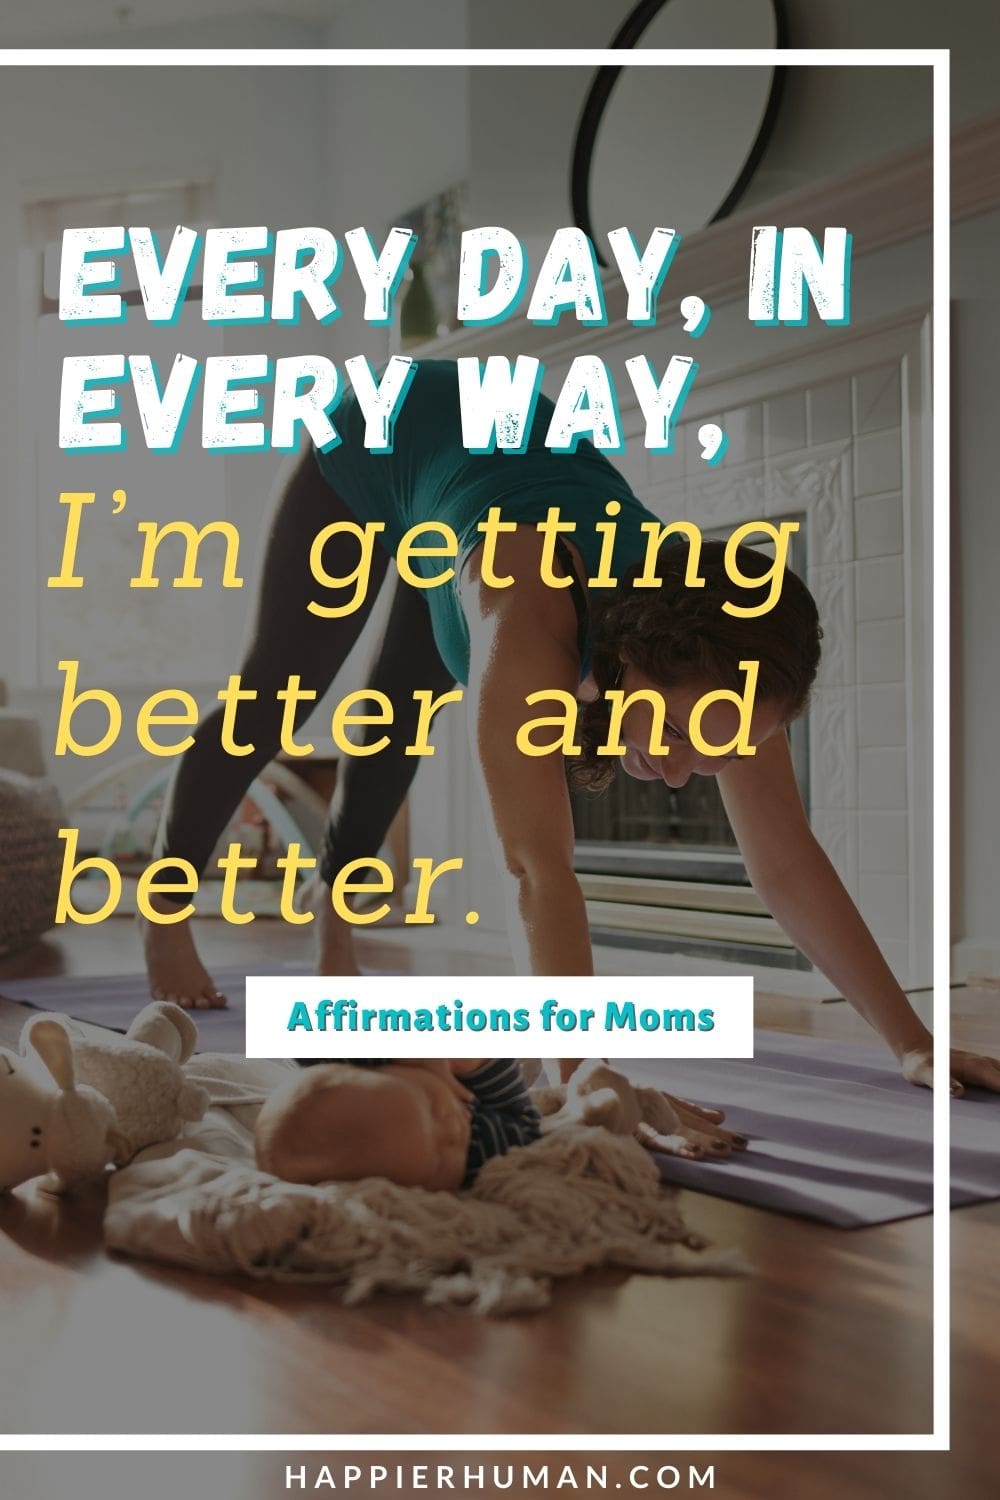 Affirmations for Moms - Every day, in every way, I’m getting better and better. | affirmations for overwhelmed moms | positive affirmations for parents health | positive affirmations for mothers and daughters